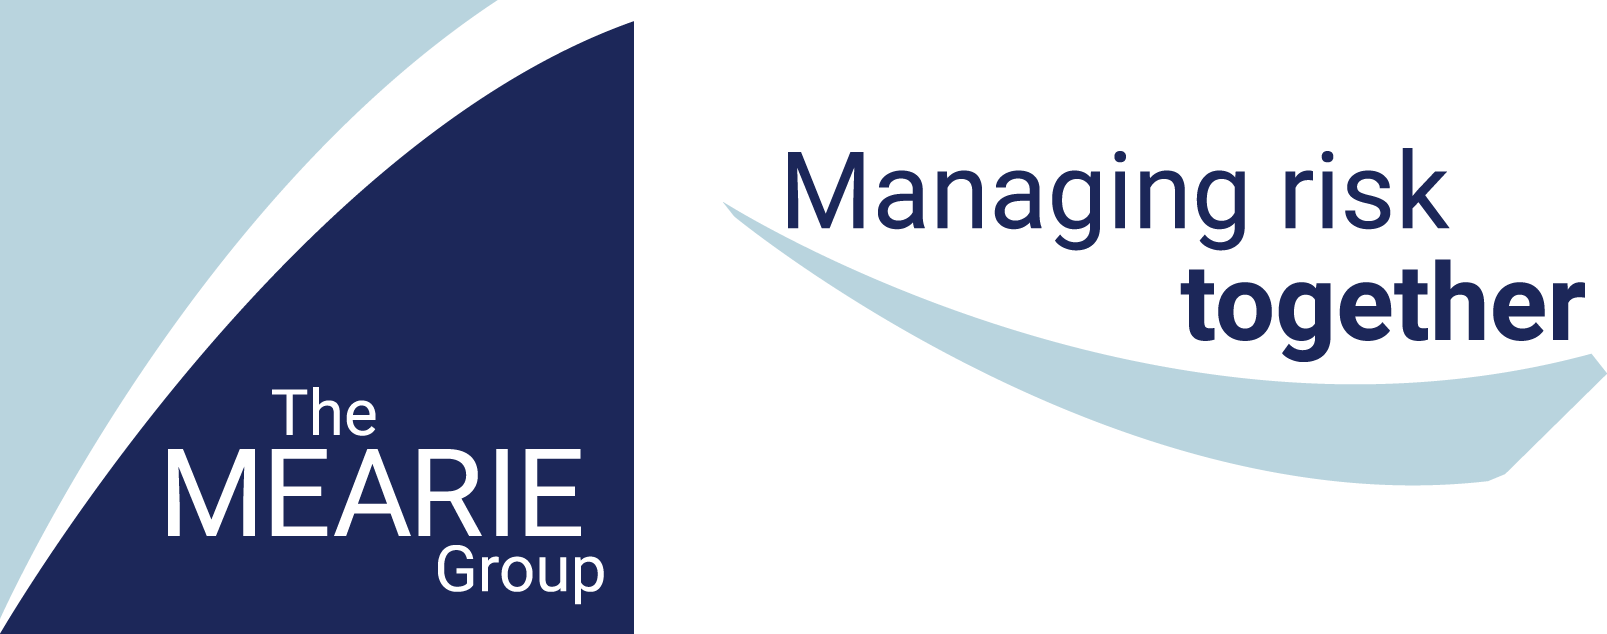 The MEARIE Group logo